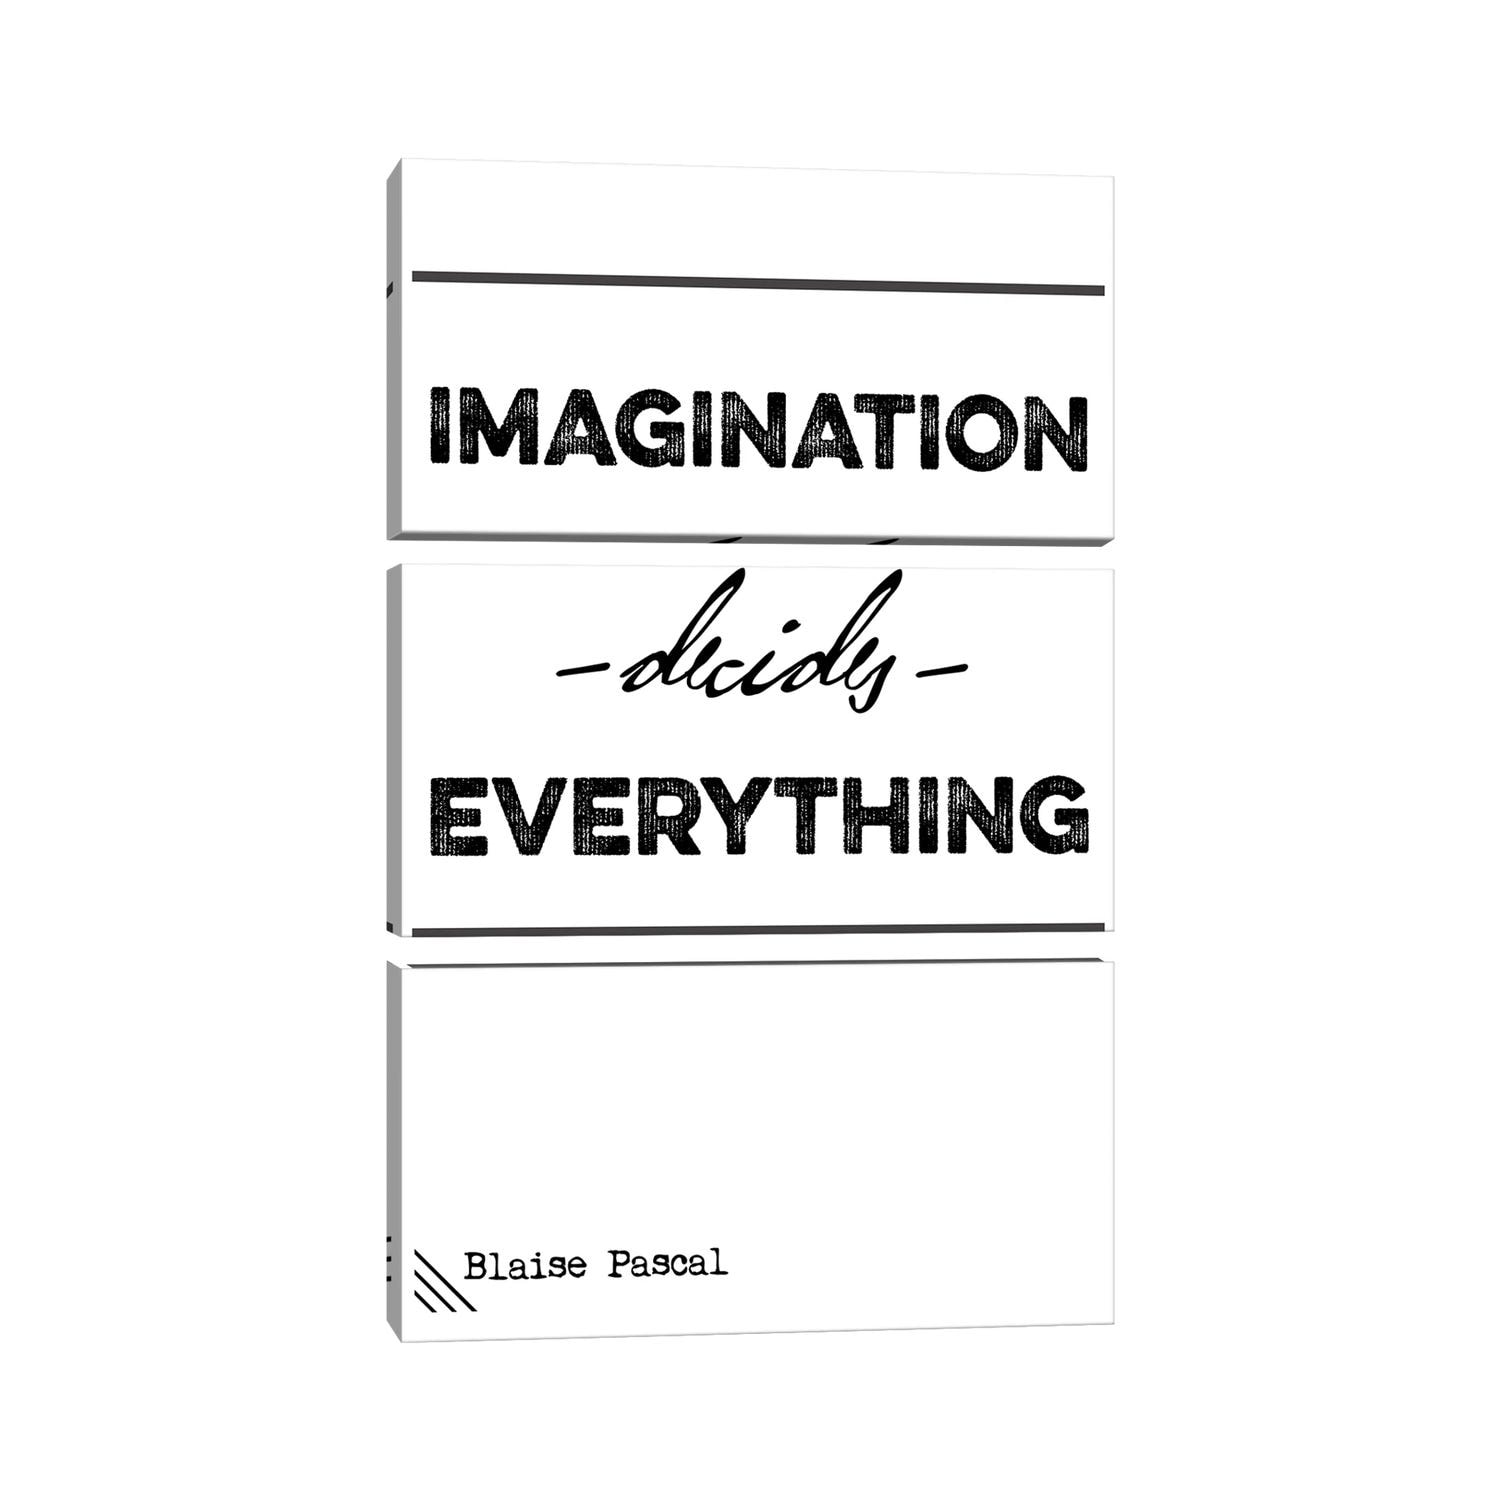 https://ak1.ostkcdn.com/images/products/is/images/direct/f047610bbb53899bc544fec85c748e9fd6f7b3b8/iCanvas-%22Imagination-Decide-Everything---Blaise-Pascal-Quote%22-by-Nordic-Print-Studio-3-Piece-Canvas-Wall-Art-Set.jpg